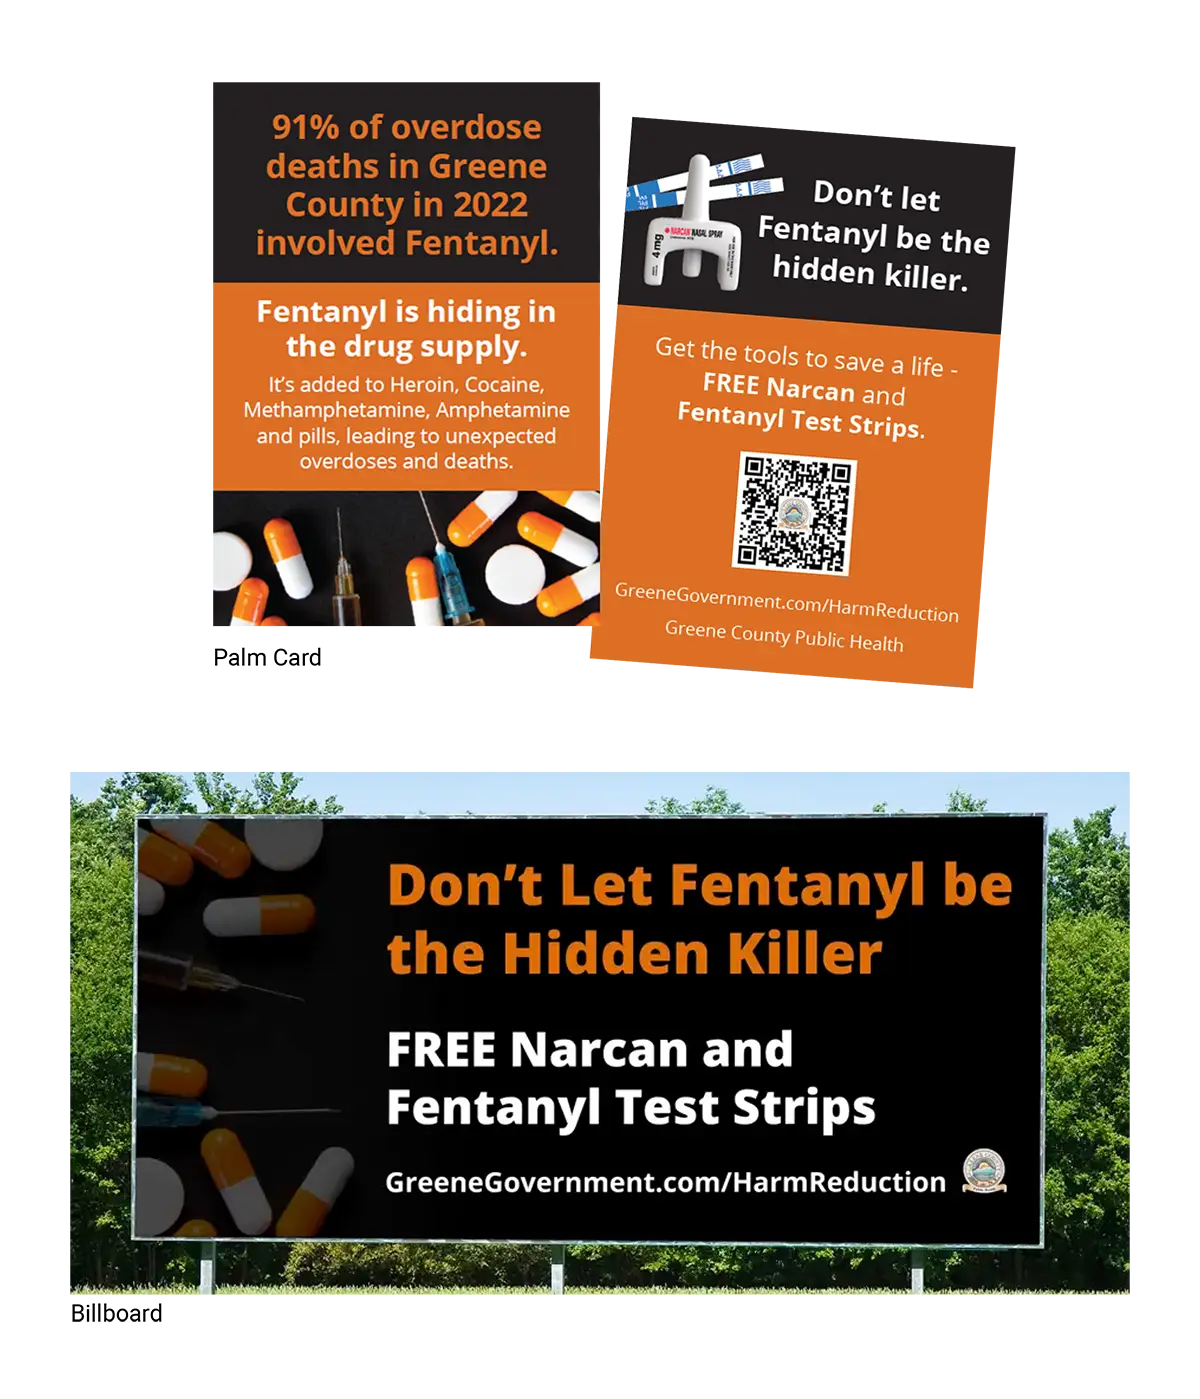 Greene County Public Health Harm Reduction Collateral Materials